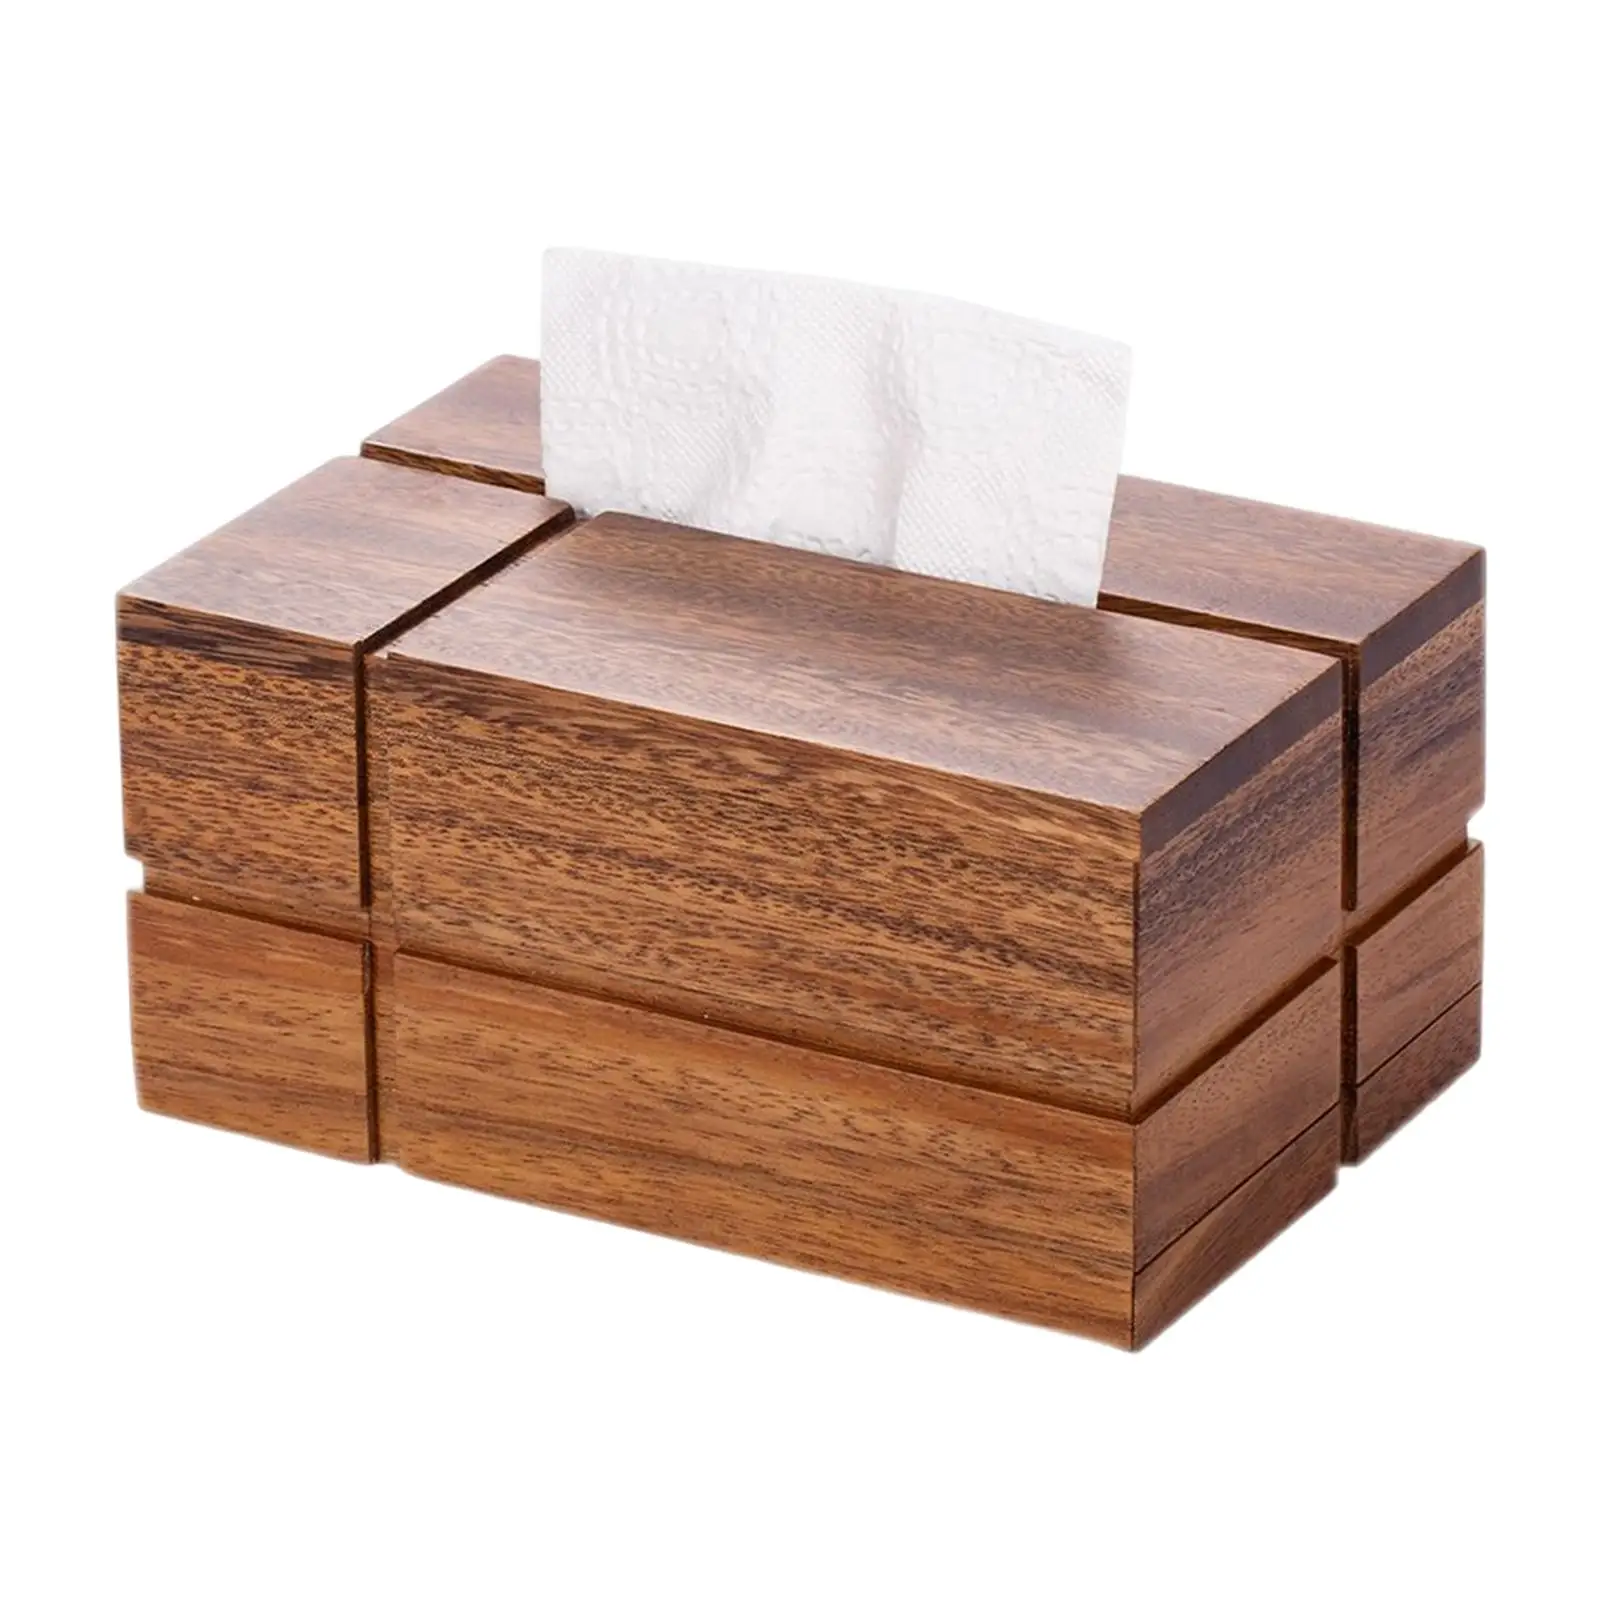 Home Solid Wood Tissue Box Durable Rectangle Paper Storage Box Crafts Facial Tissue Case for Home Kitchen Tables Bathroom Hotel